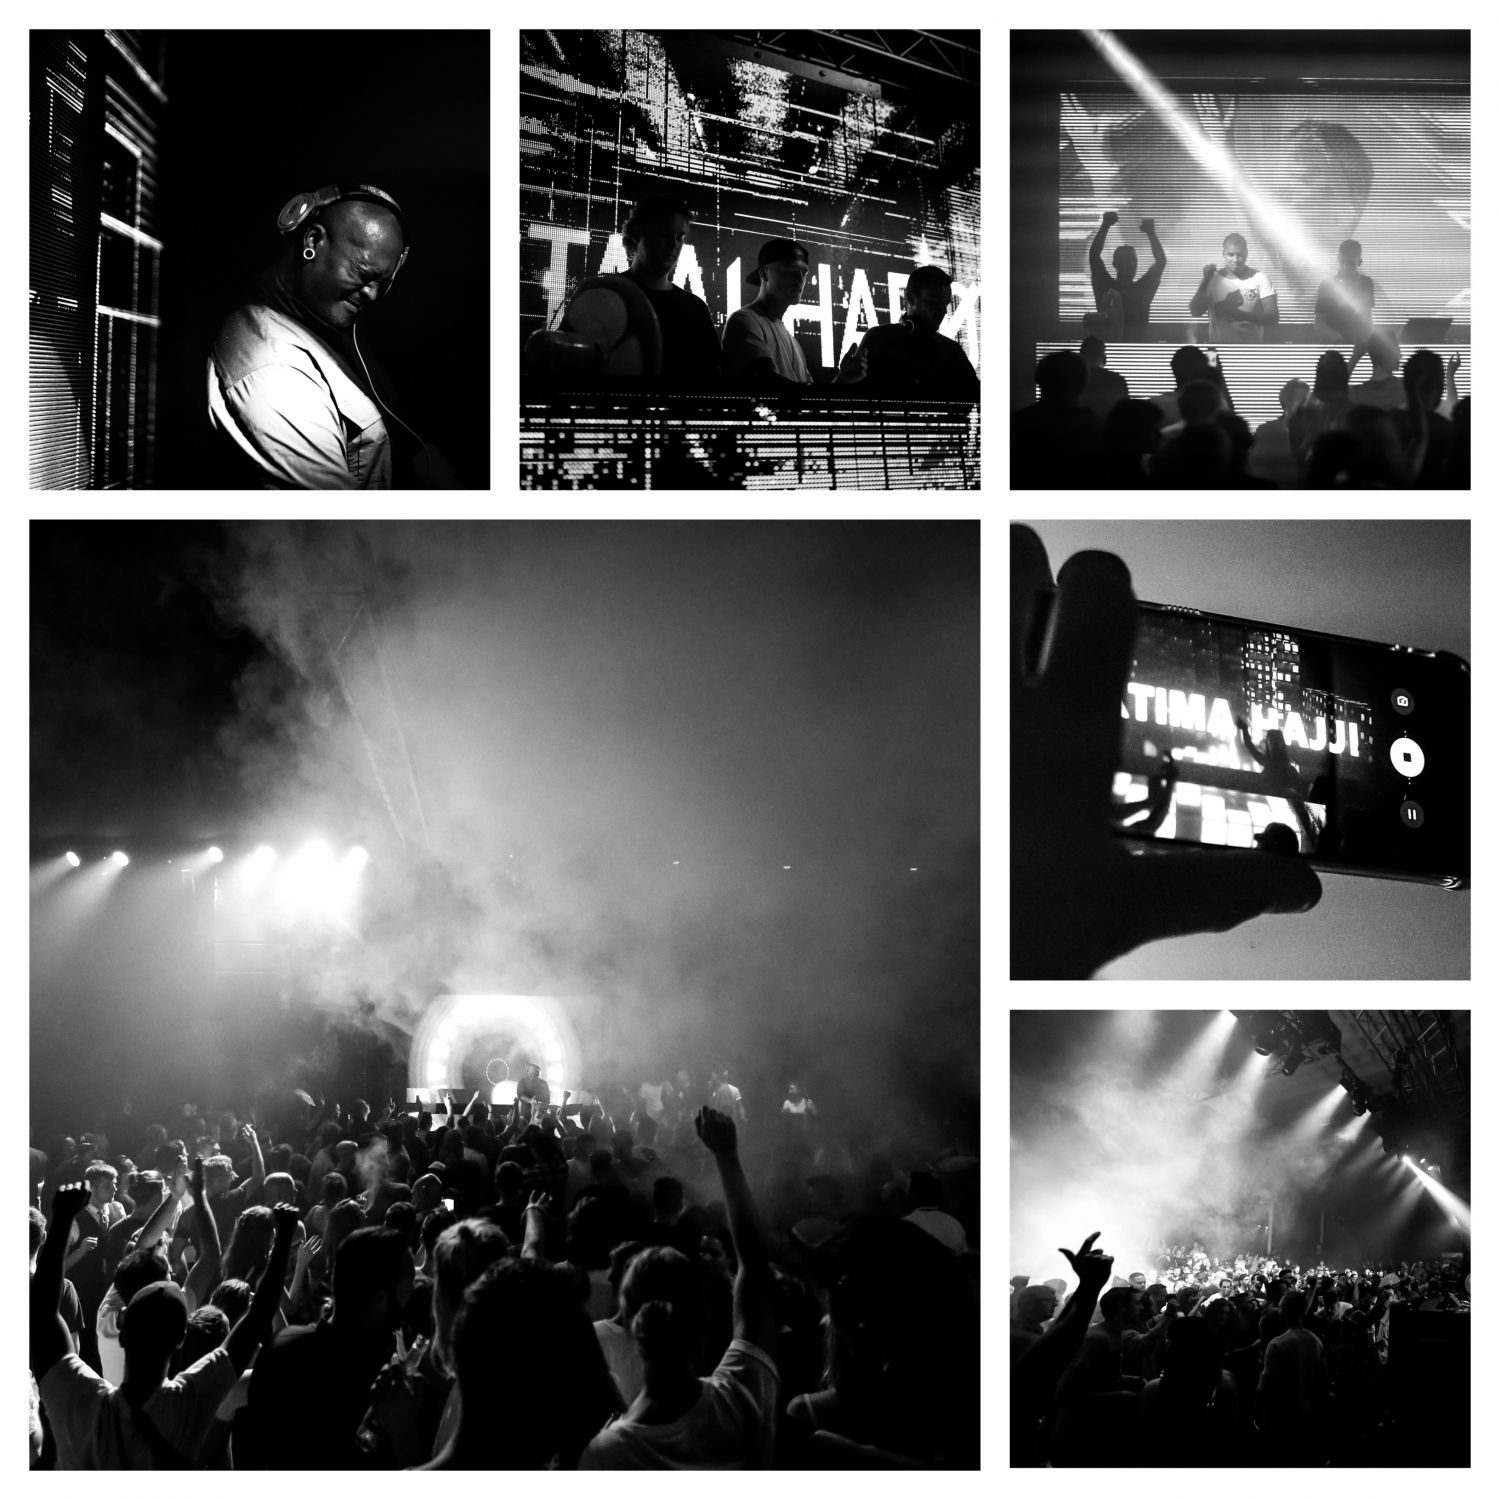 Pictures Be Rave presents DJ Rush and Fatima Hajji are online now